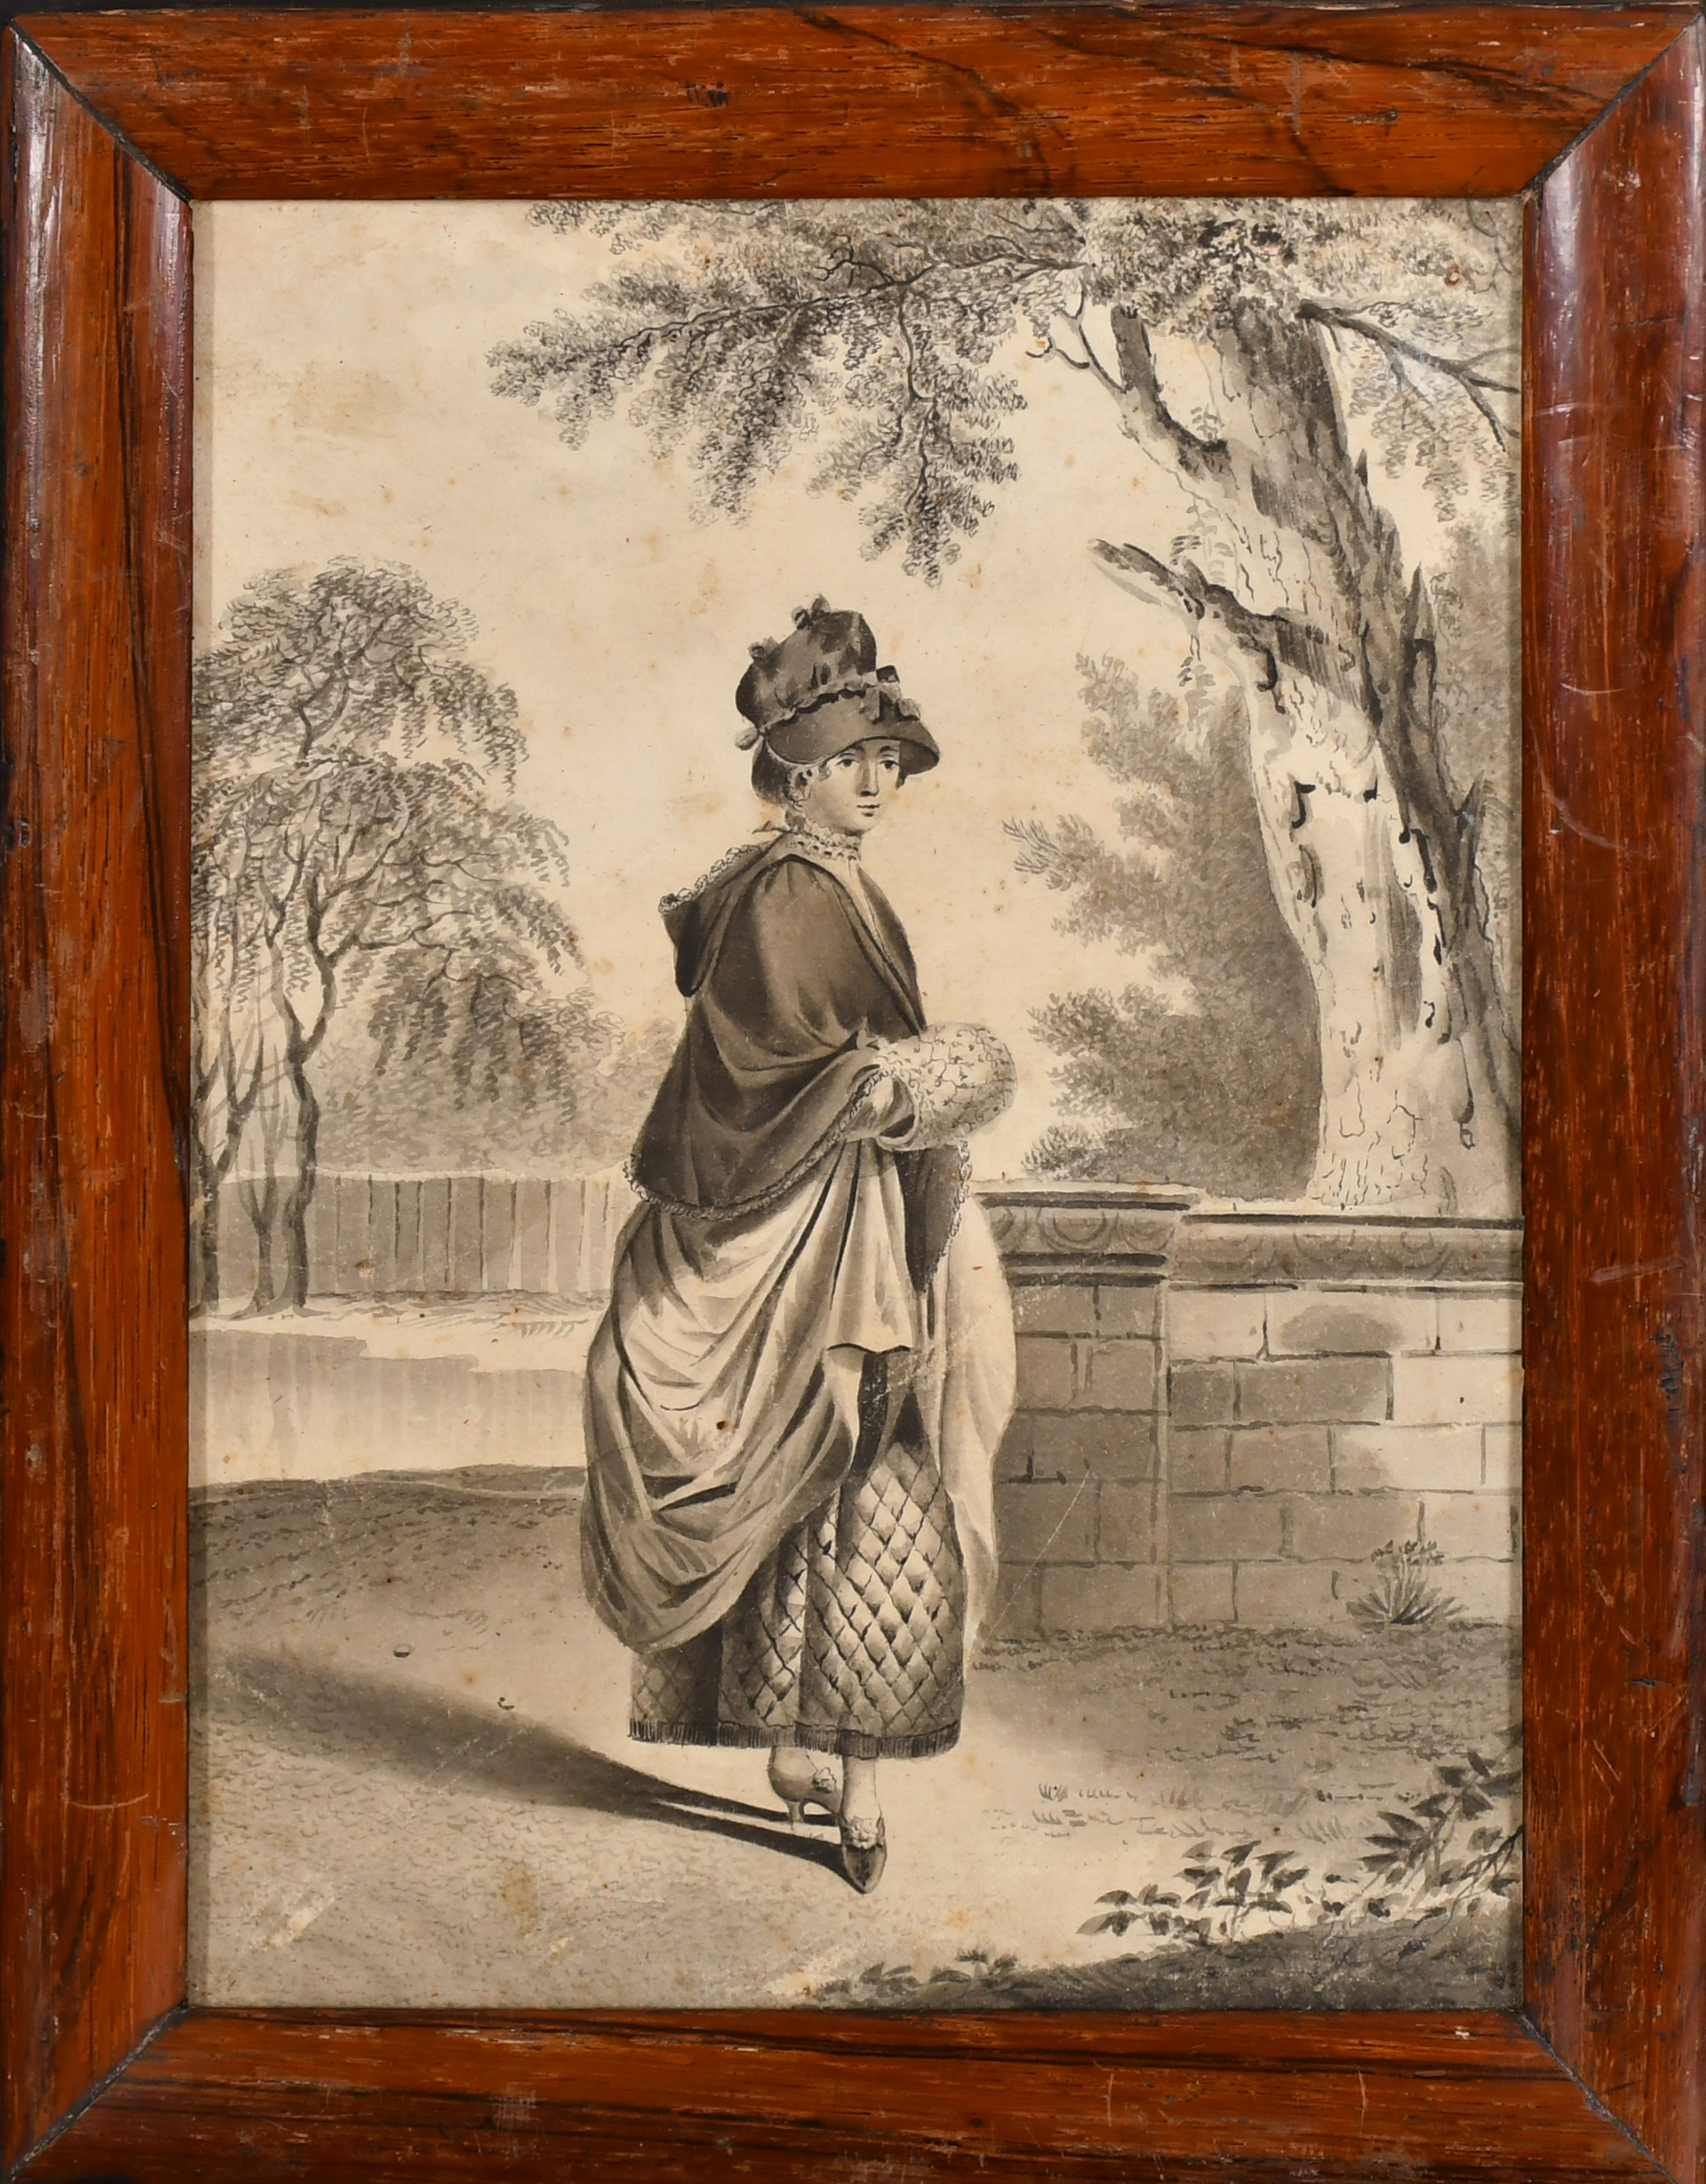 Late 18th Century English School. A Lady in a Landscape, Pencil, 8.5" x 6.5" (21.6 x 16.5cm) - Image 2 of 3